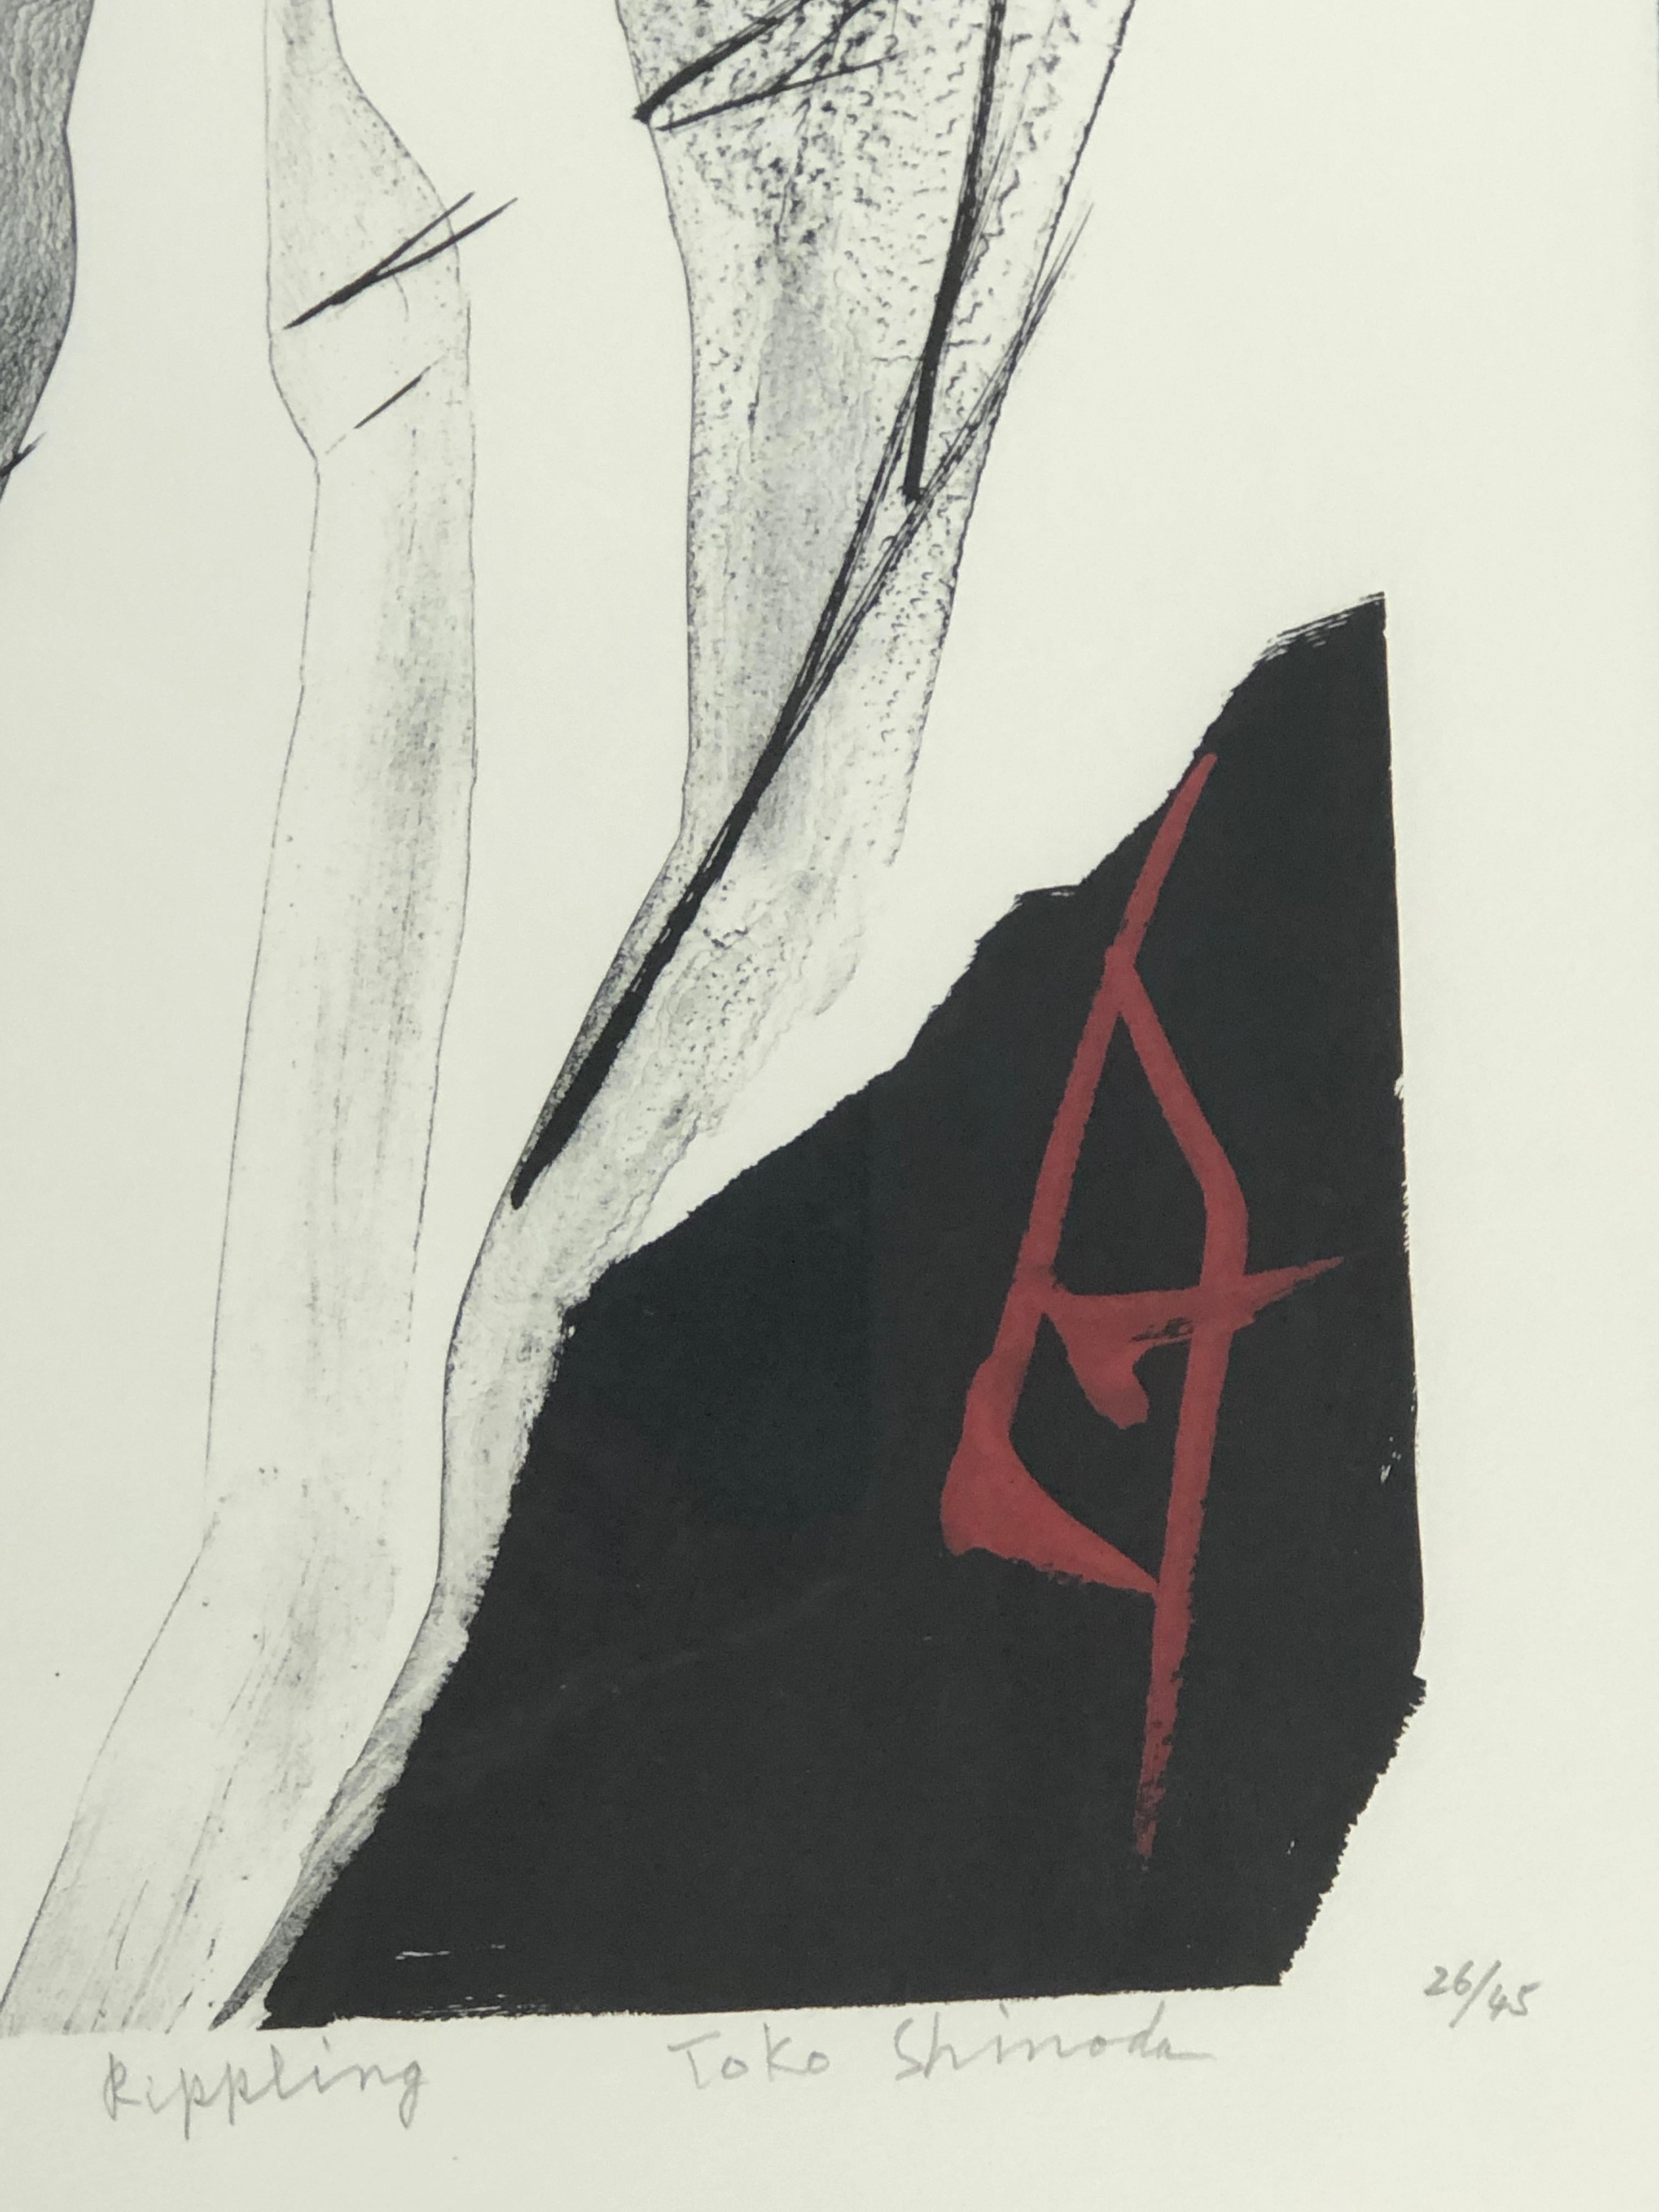 Rippling, limited edition lithograph, Japanese, black, white, red, signed - Print by Toko Shinoda